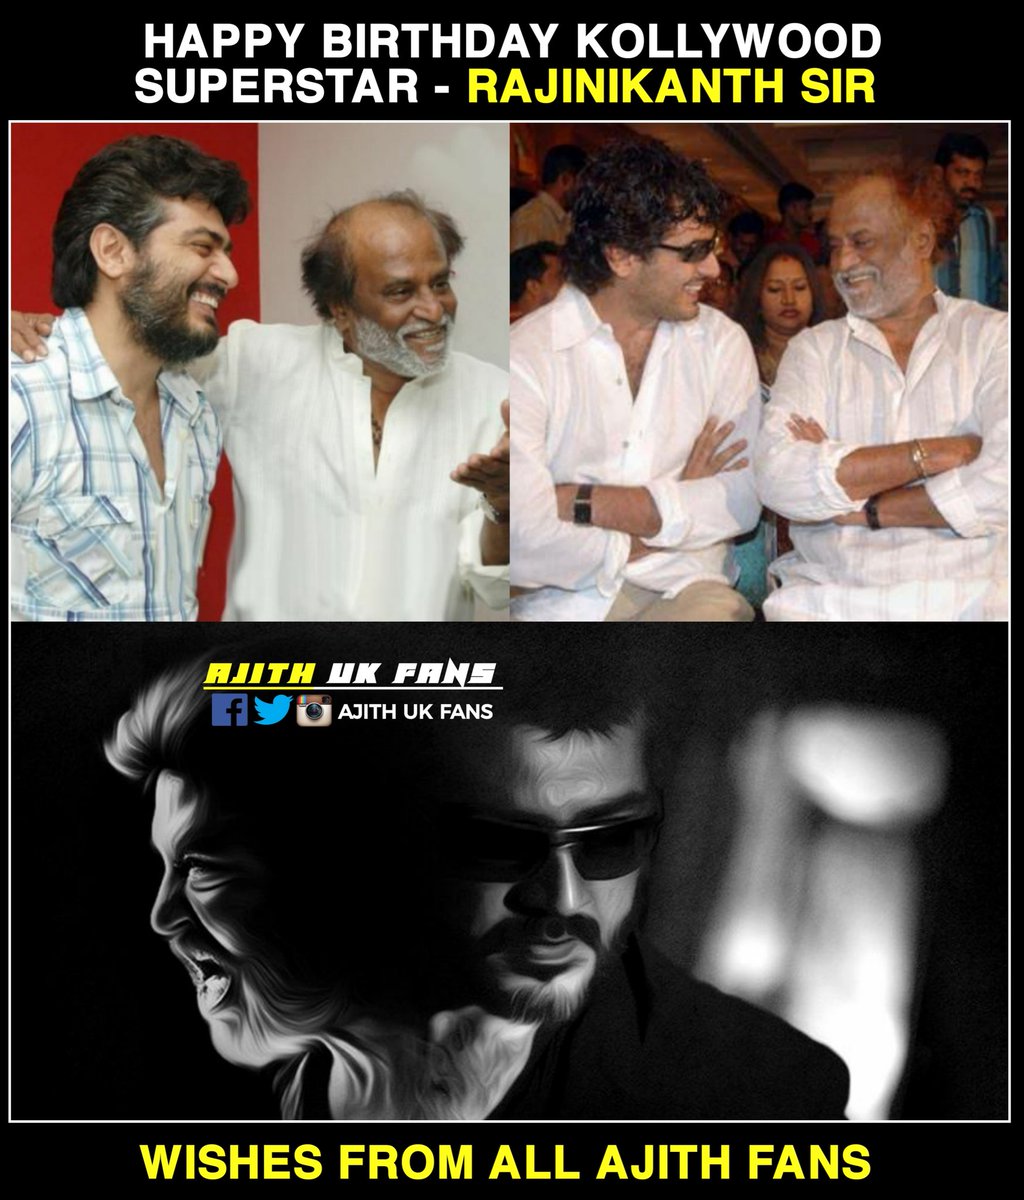 Happy Birthday Our Kollywood Superstar - @rajinikanth sir, Wishes From All #AK Fans ❤🤗

#Thunivu #AjithKumar #HappyBirthdayRajinikanth #HBDRajinikanth #HBDThalaivaa.